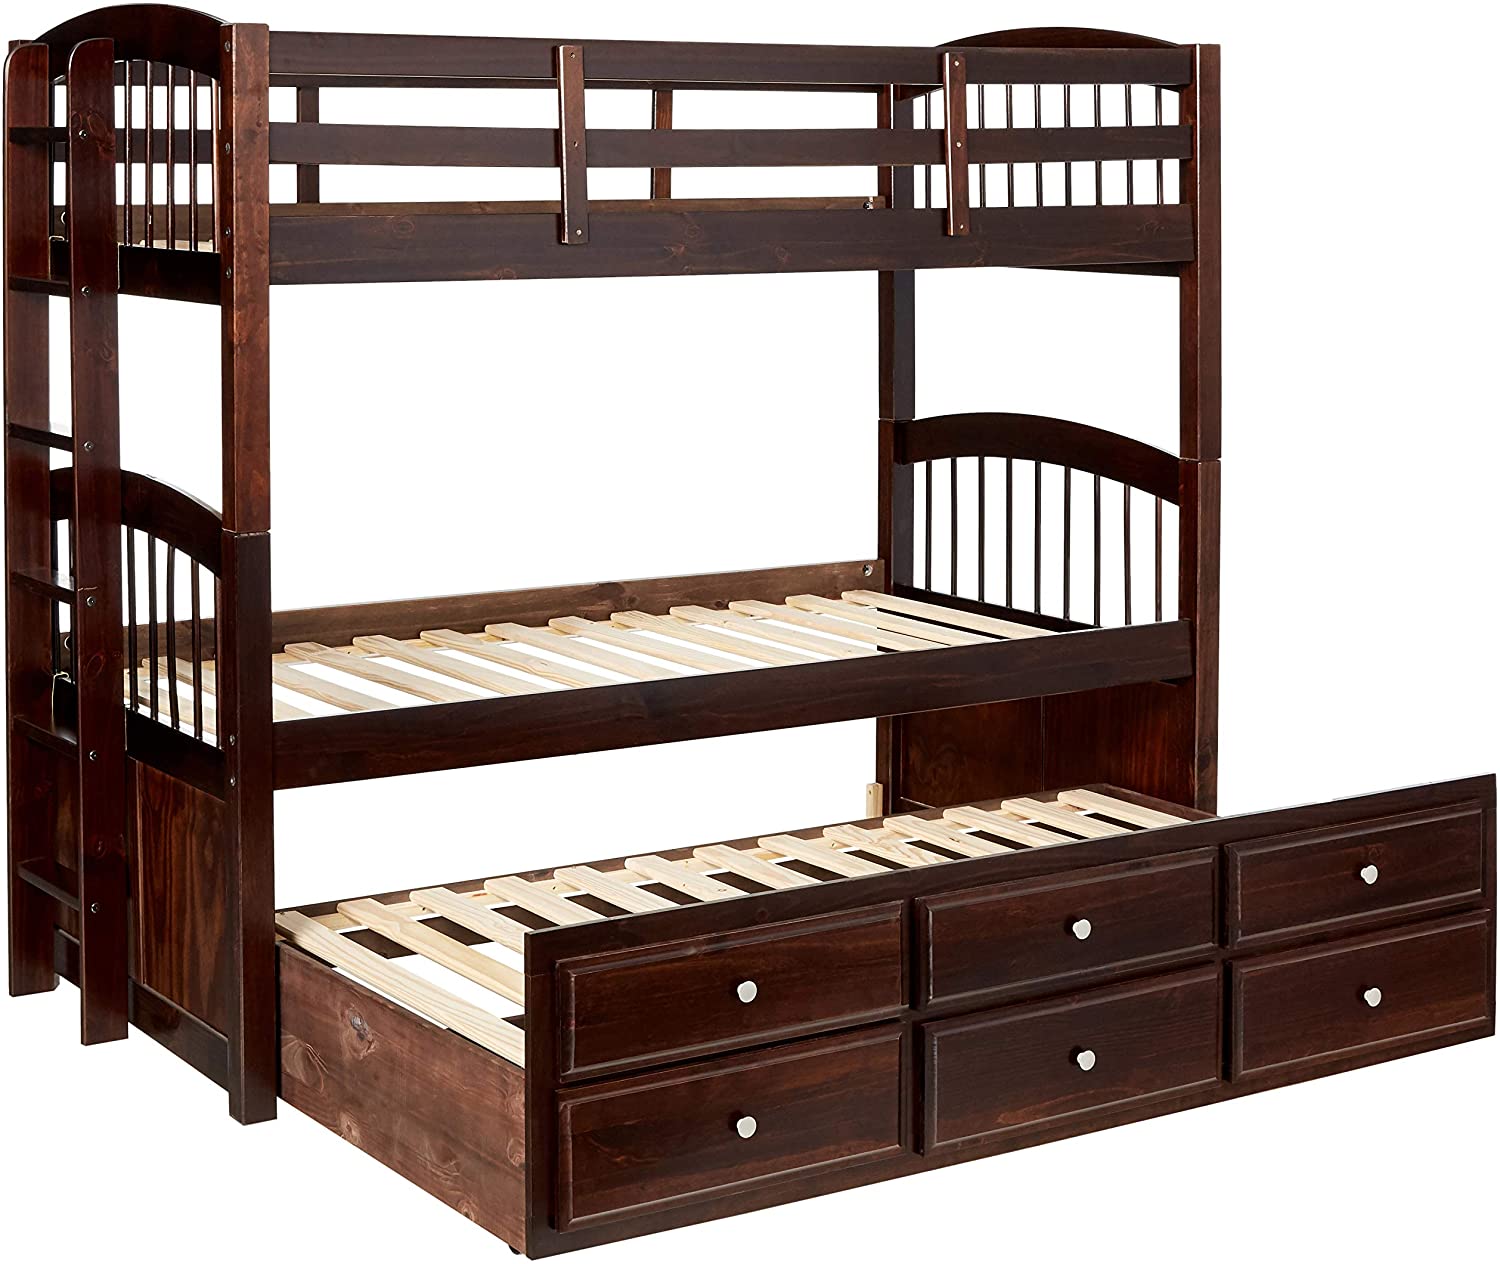 Bellemave® Twin Size Bunk Bed with Trundle Bellemave®